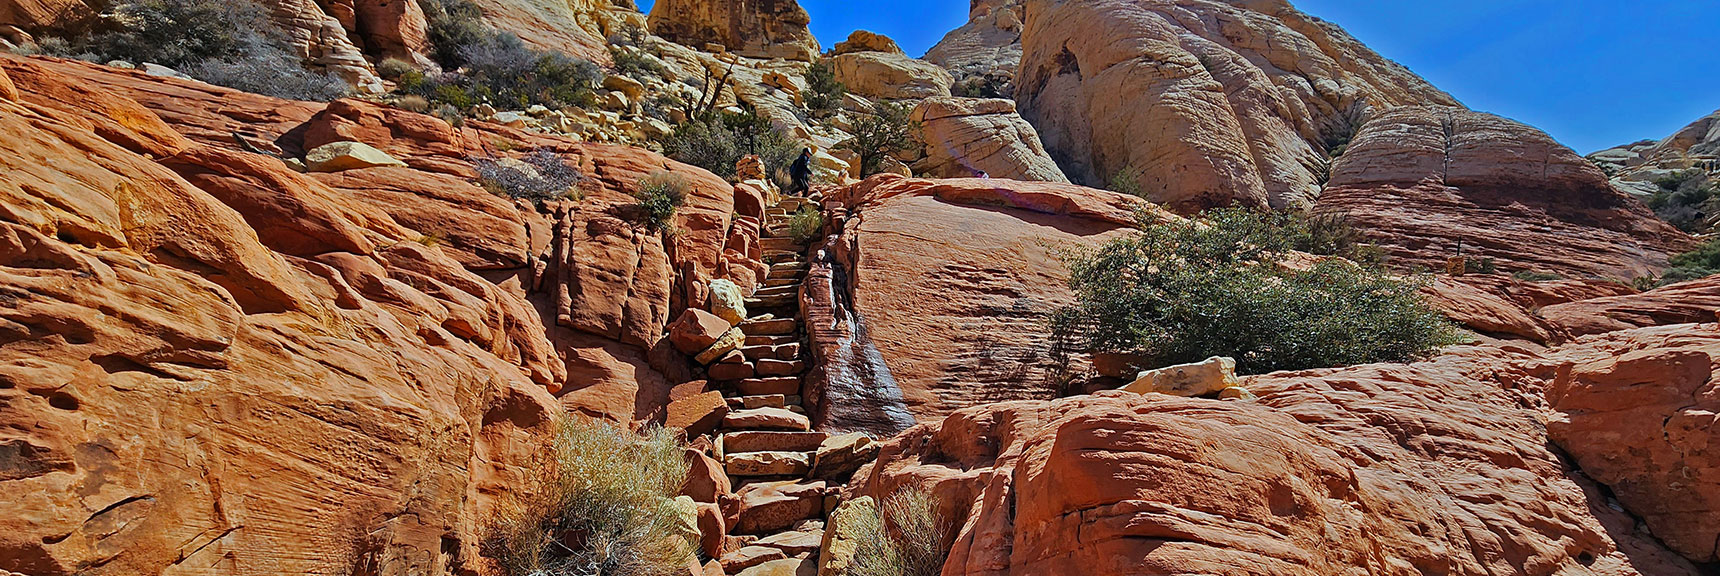 More Sandstone Stairways. Surrounded by Incredible Colors Along Calico Tanks Trail | Ash Canyon to Calico Tanks | Calico Basin and Red Rock Canyon, Nevada | David Smith | Las Vegas Area Trails